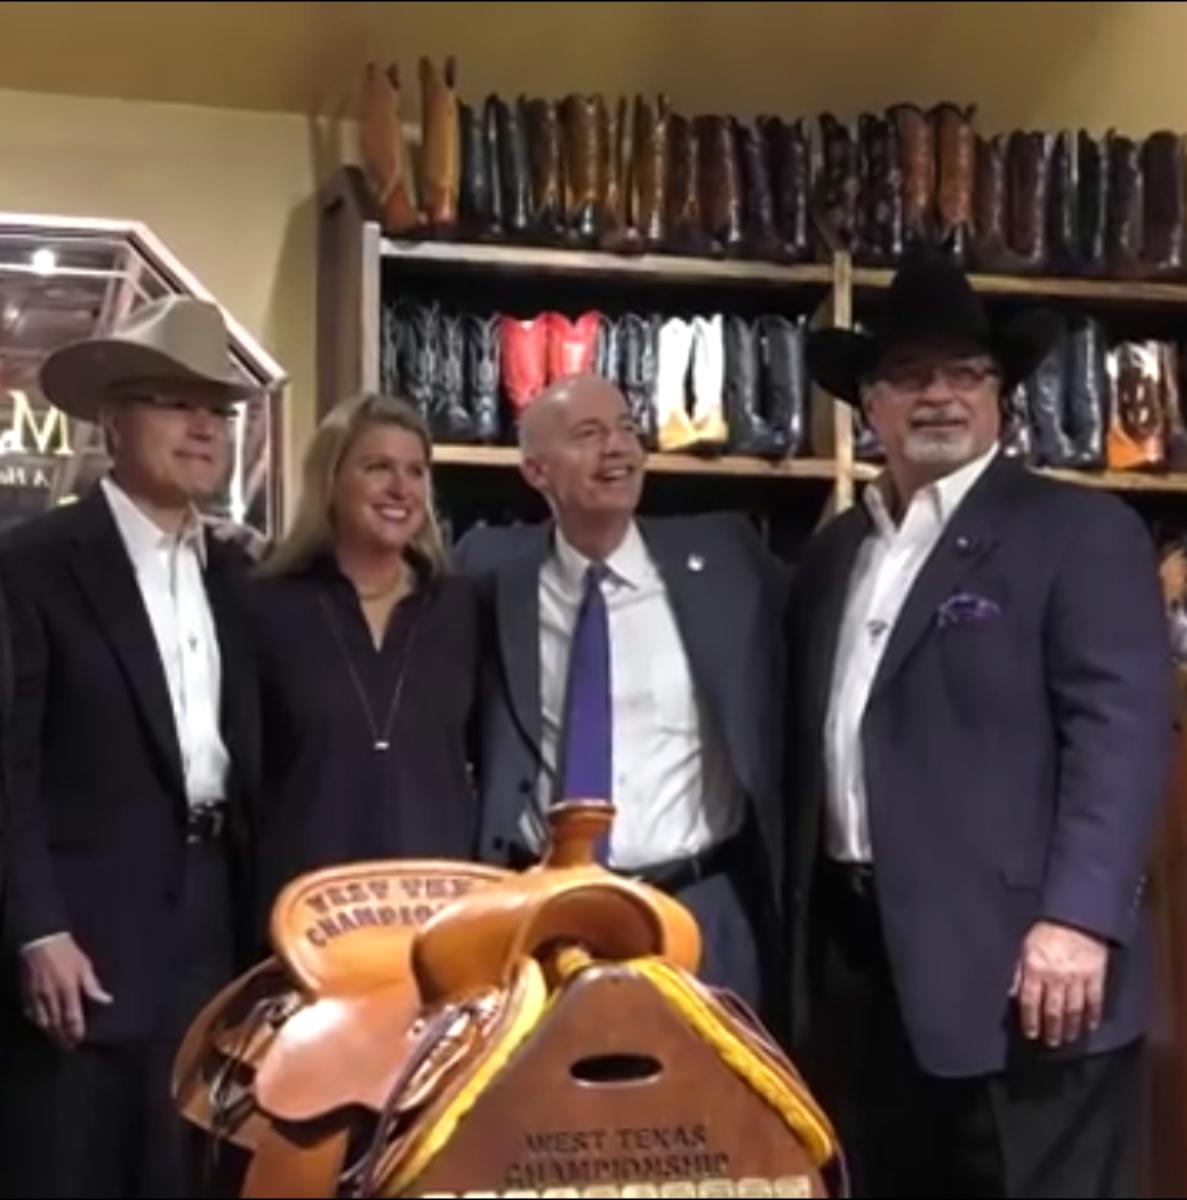 West Texas Championship Saddle donated by ML Leddy's of Fort Worth. Pictured from left to right: Wilson and Martha Franklin, TCU Chancellor Victor Boschini, and Mark Dunlap